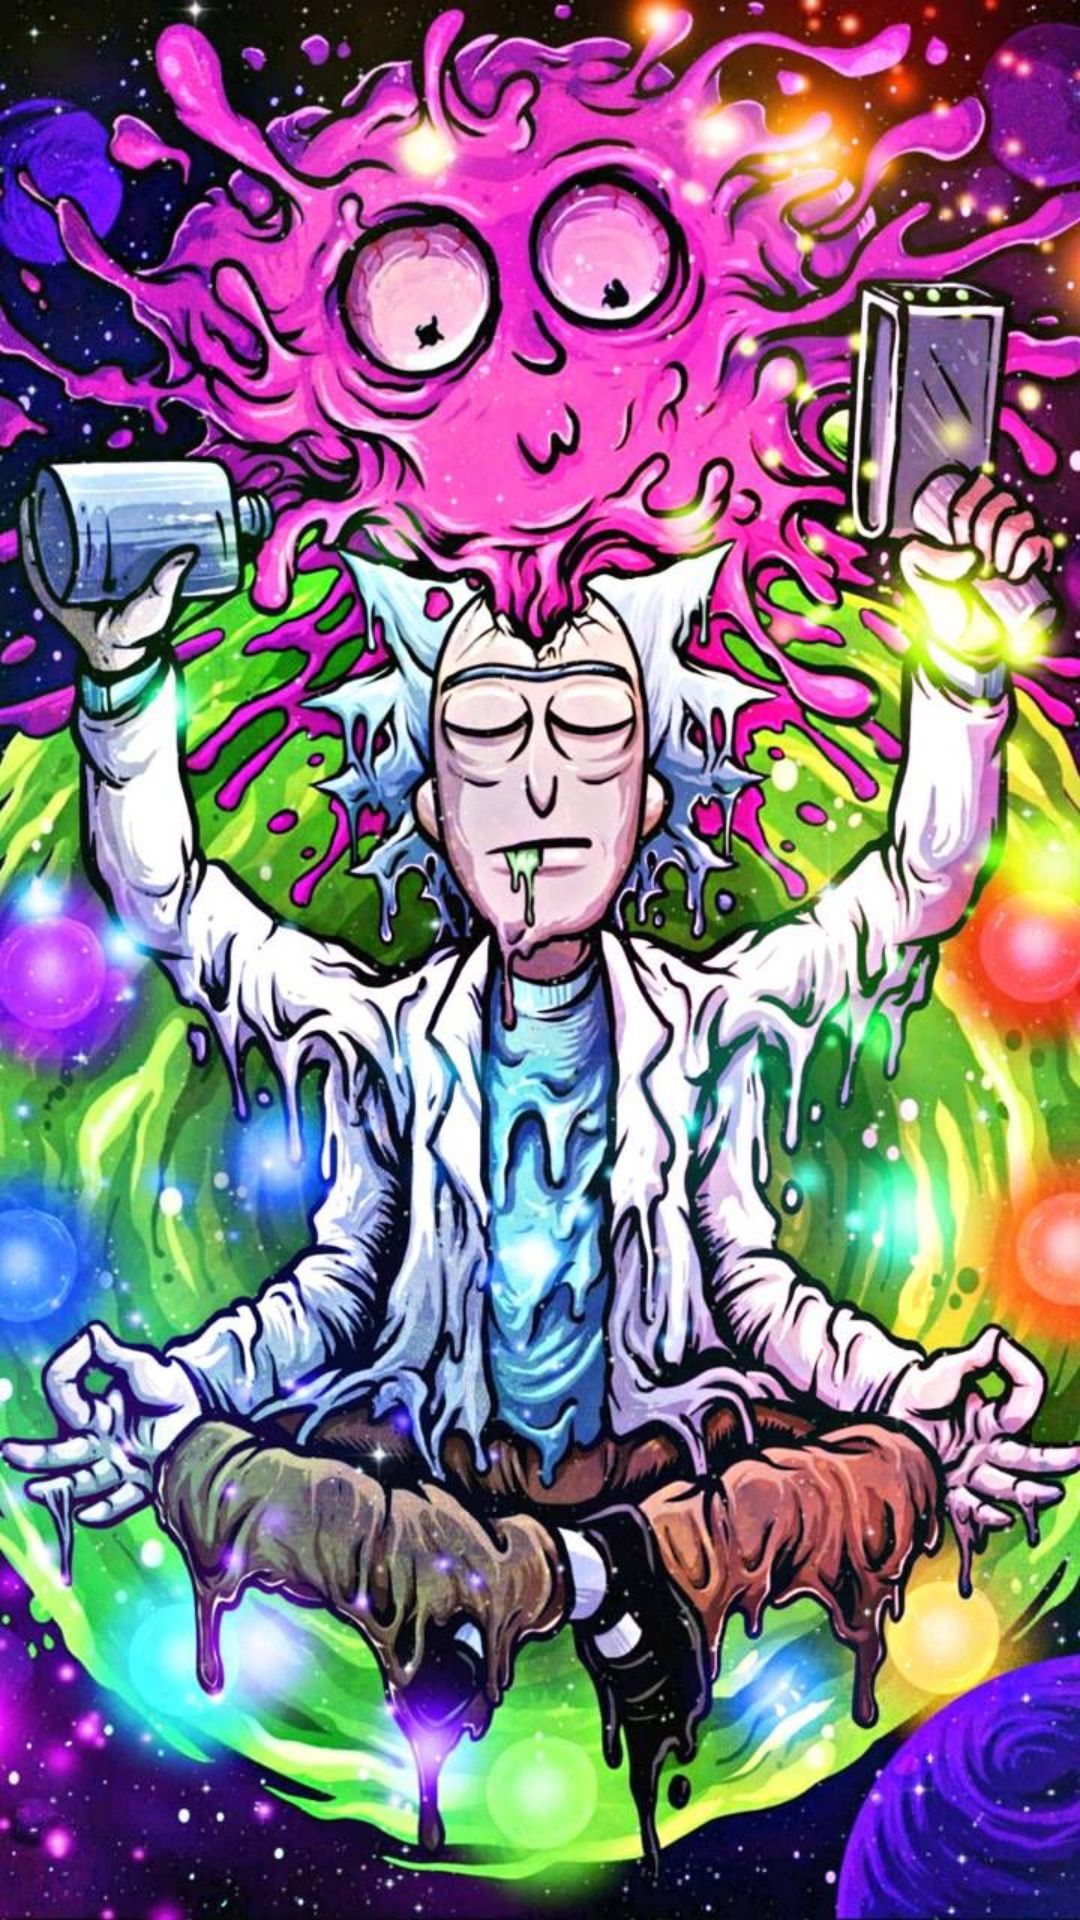 Rick and Morty Wallpaper Best Free Rick Morty Photo & Image Download